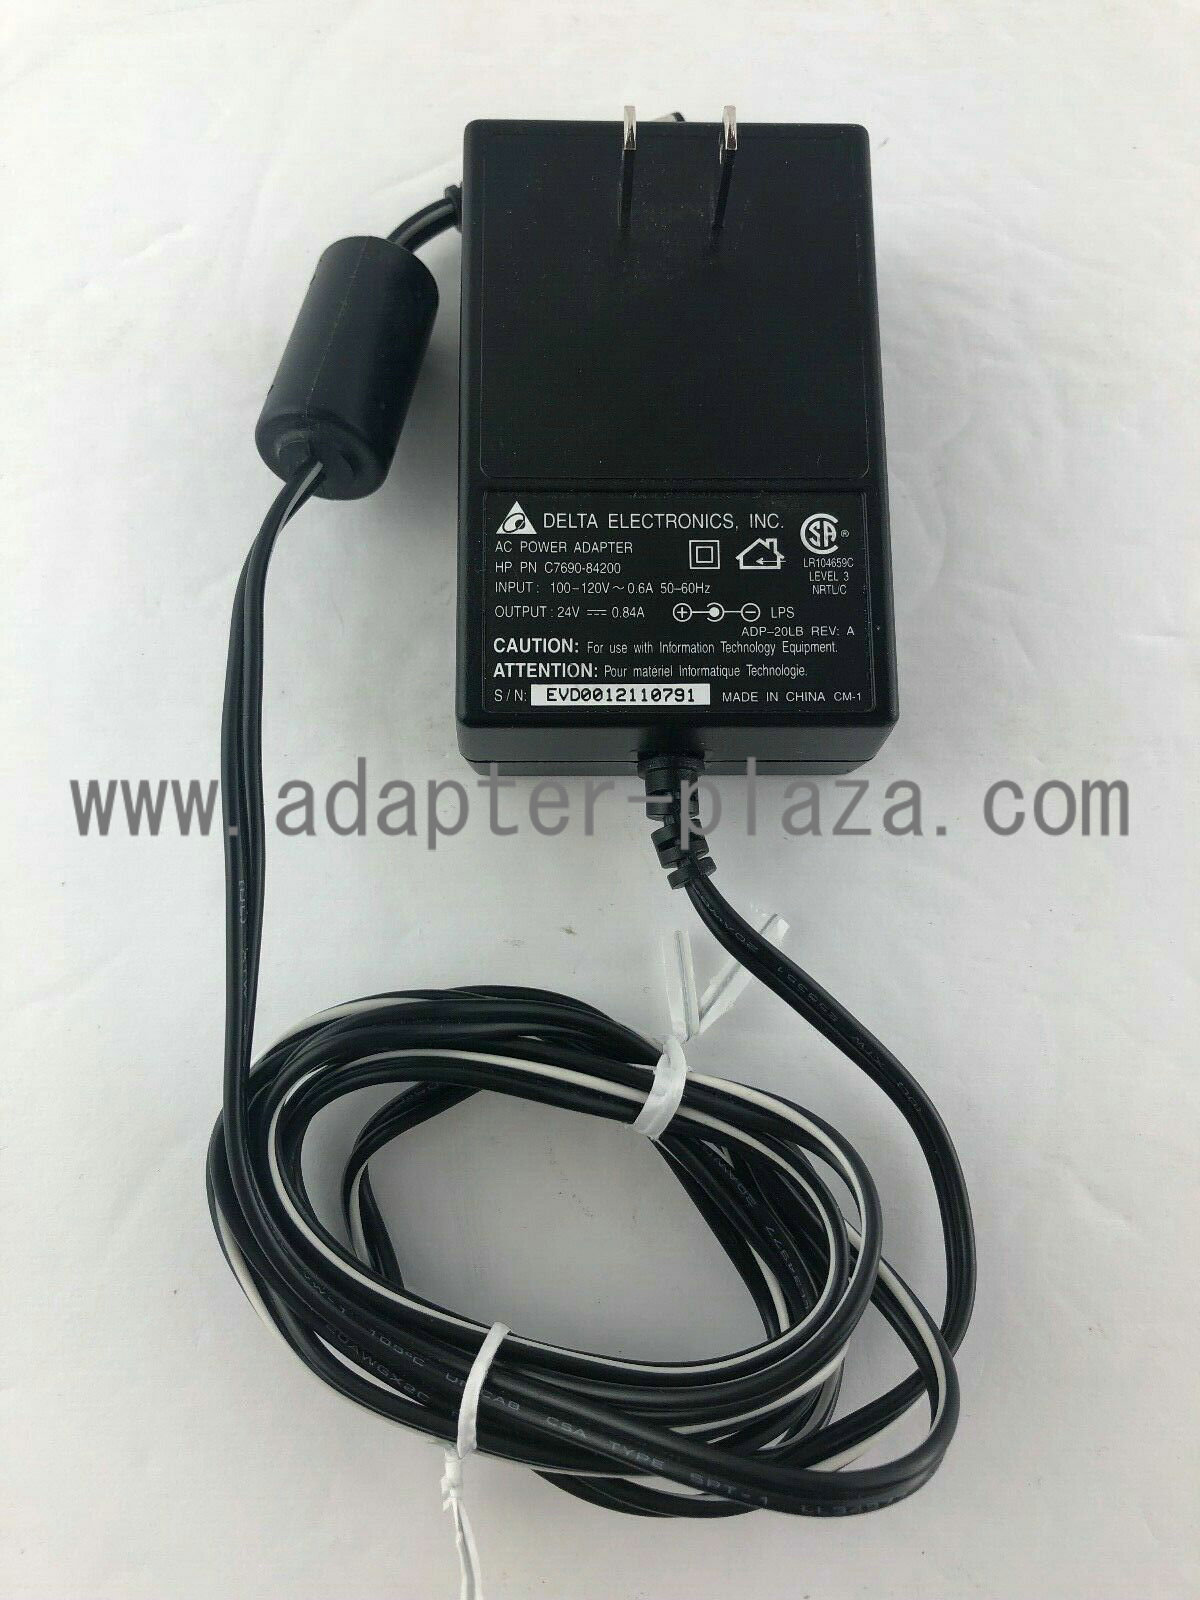 NEW Delta Electronics ADP-20LB Power Supply DC 24V 0.84A AC Adapter - Click Image to Close